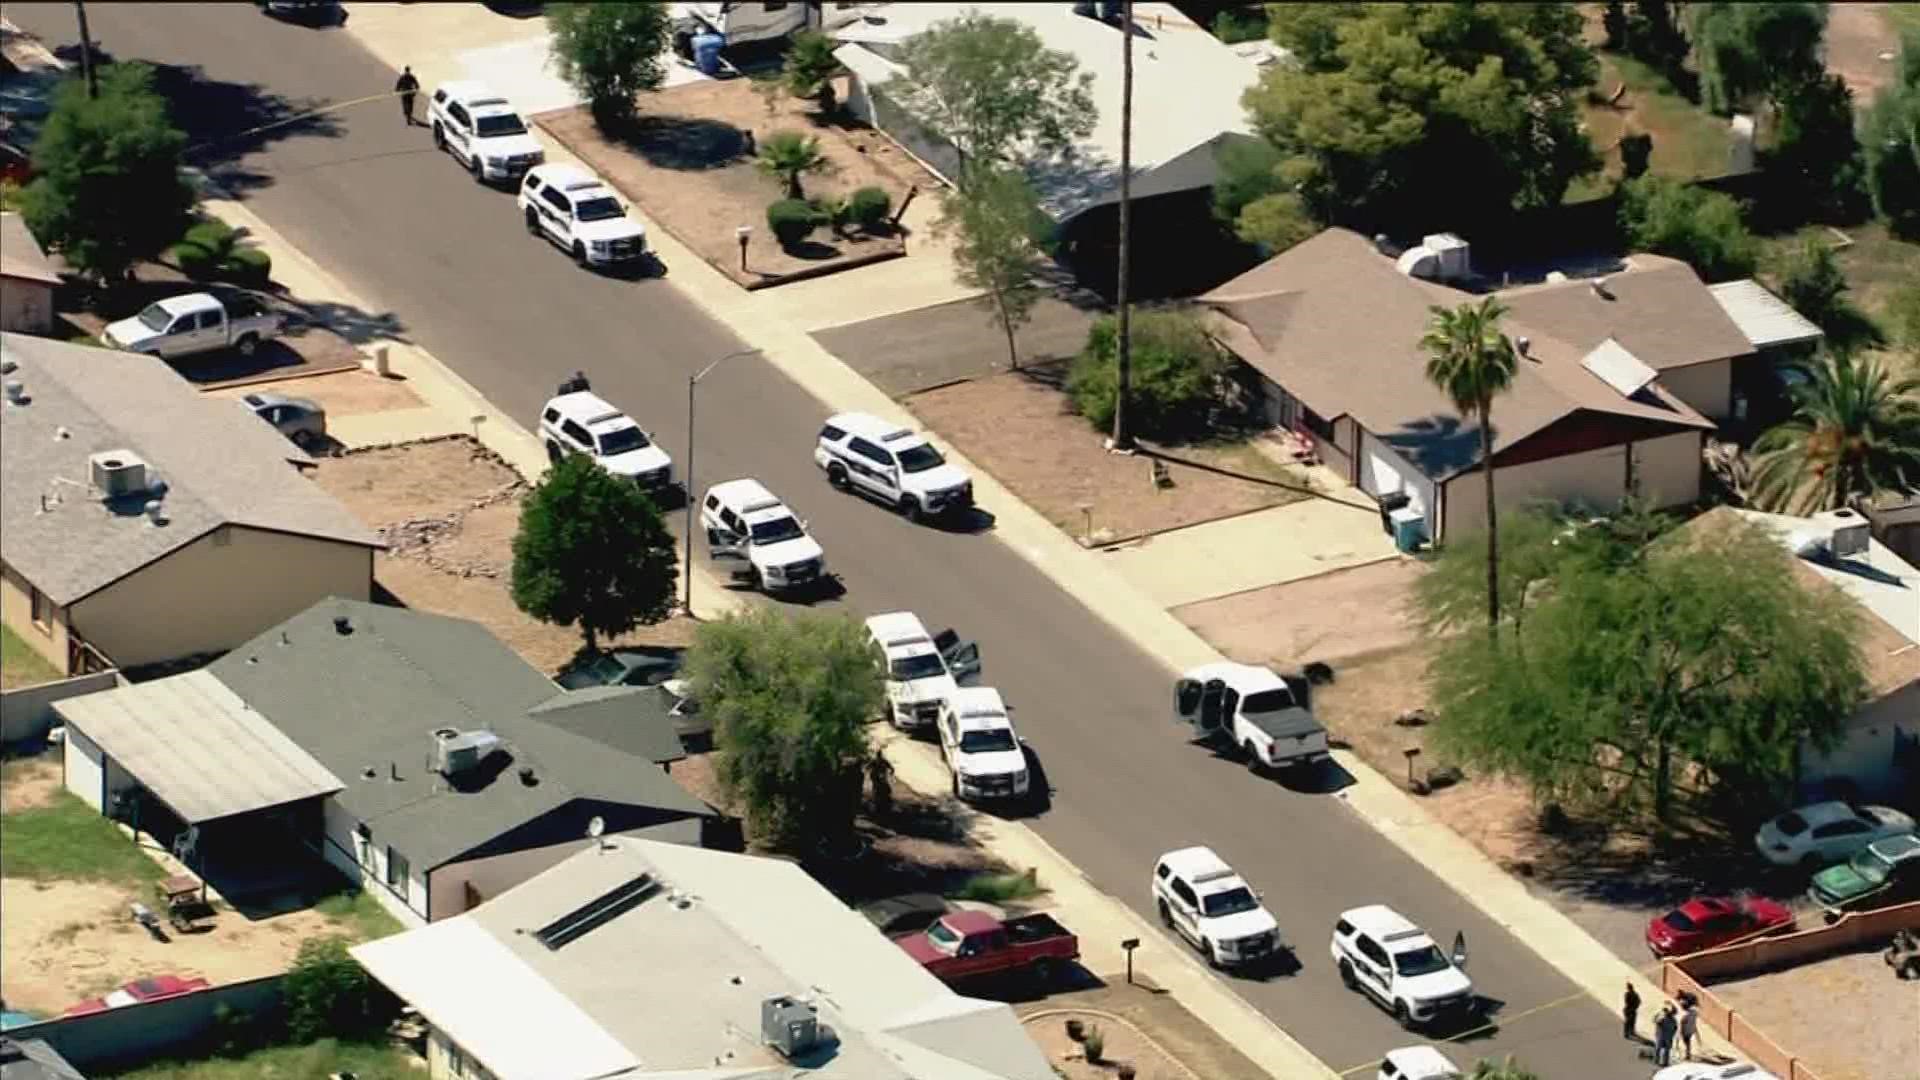 Phoenix police have taken a person into custody following a shooting in Phoenix that left two people hospitalized.